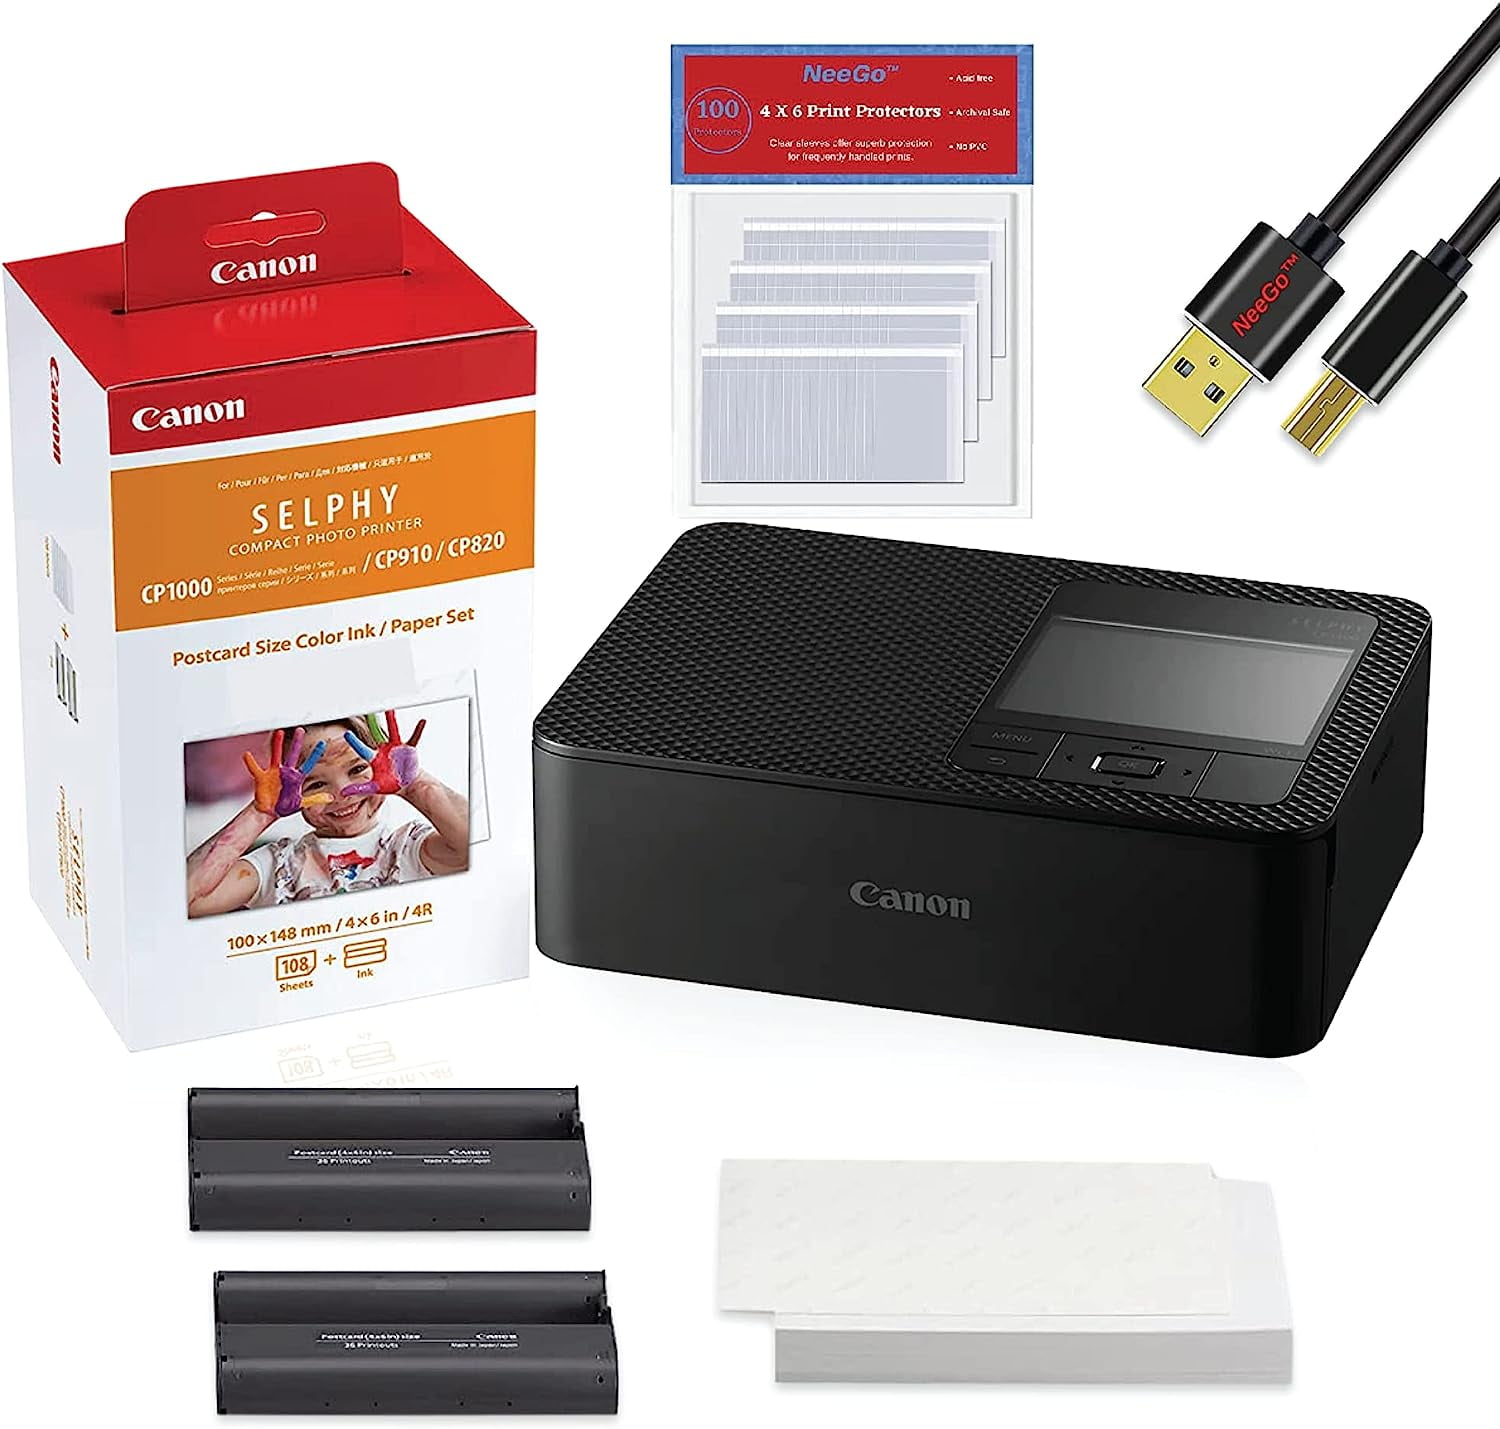 SELPHY CP1500, Compact Photo Printer